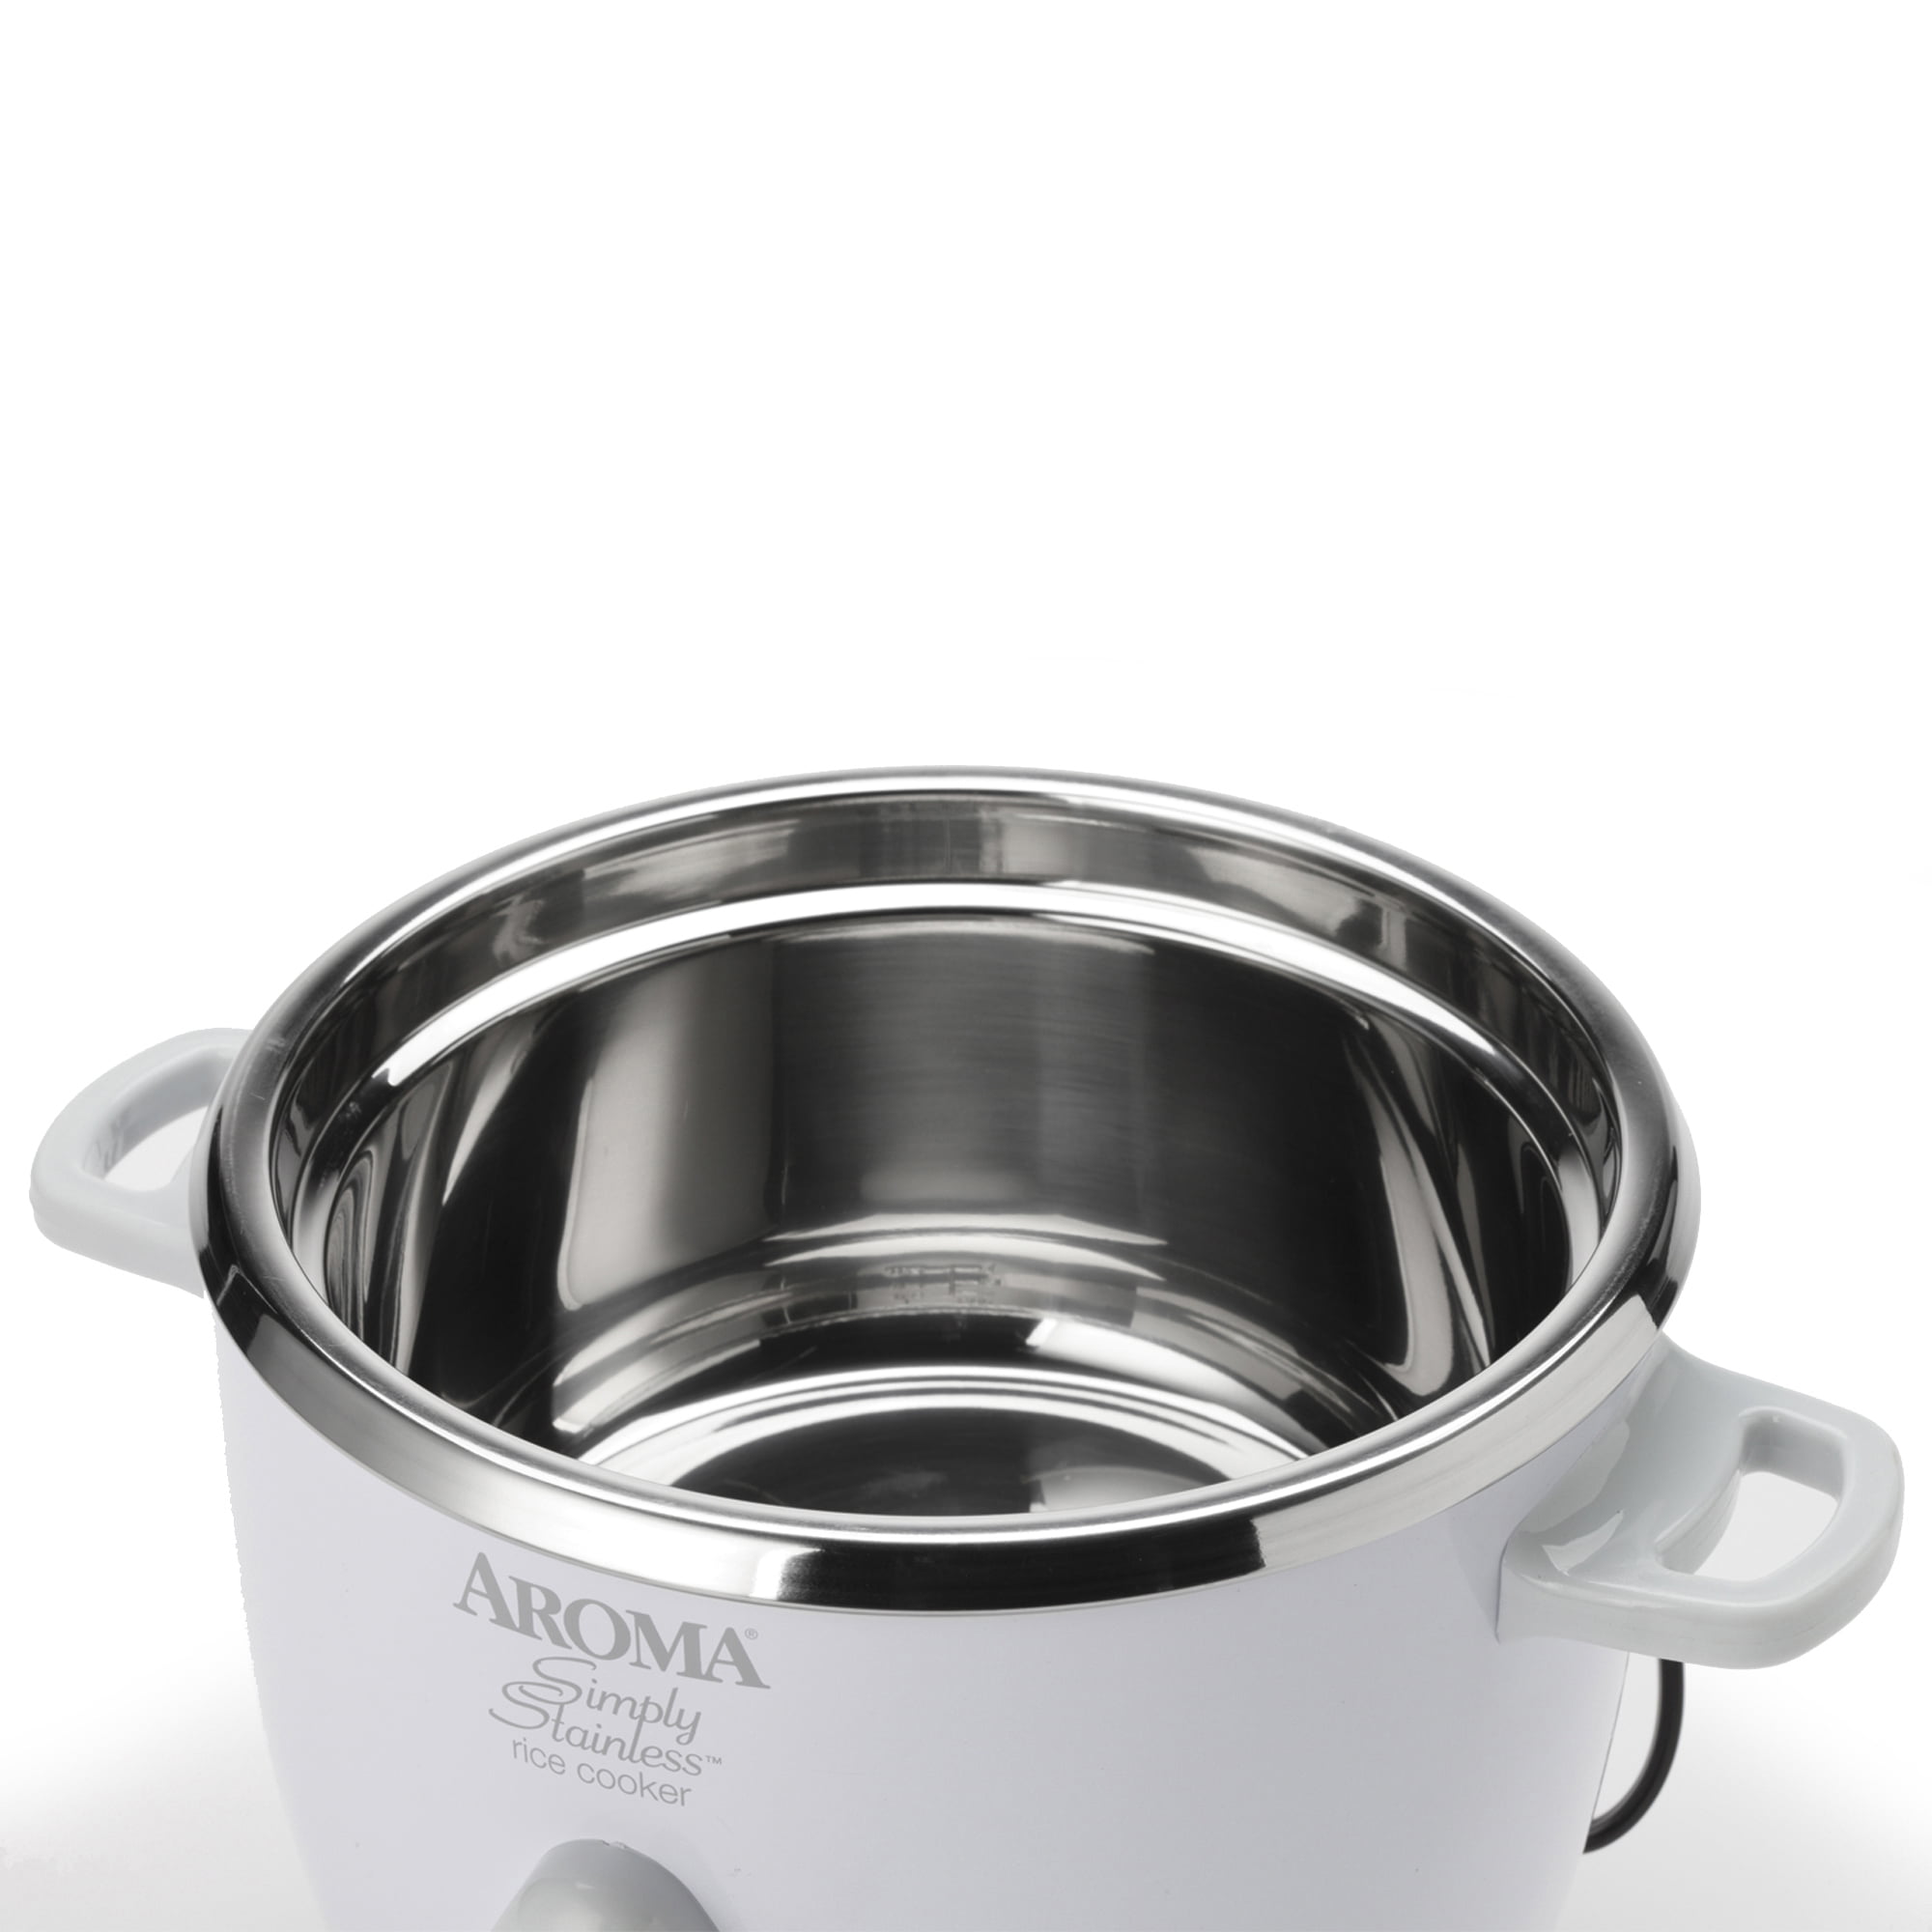 Stainless Steel Rice Measuring Cup 1 for Rice Cookers all Brands such as  Aroma Zojirushi